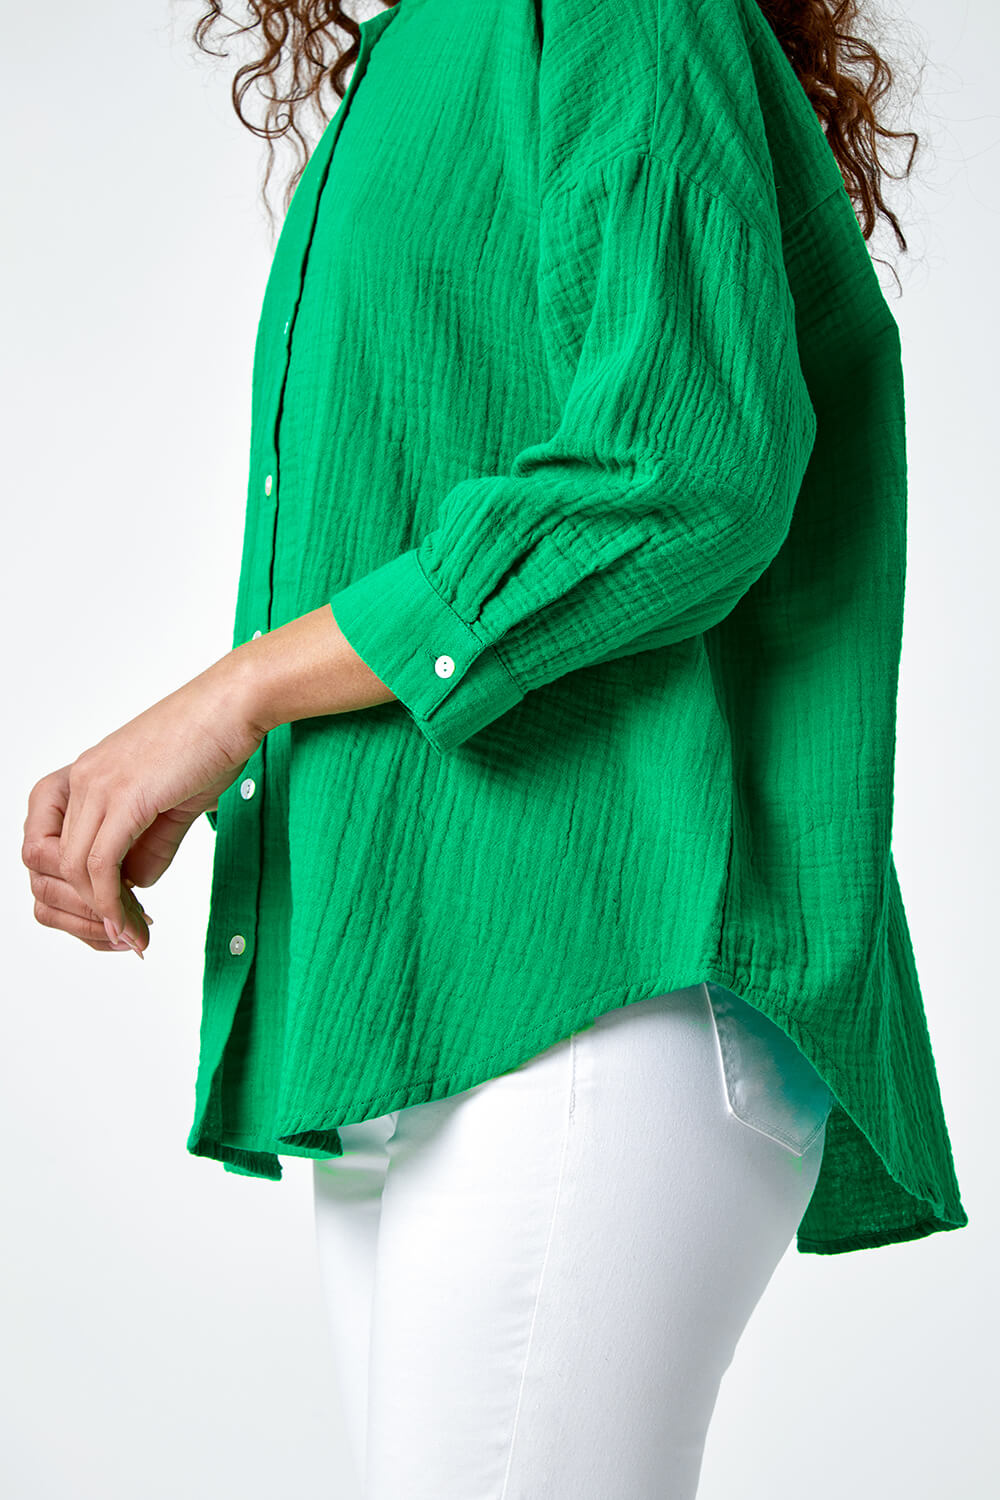 Green Cotton Textured Button Shirt, Image 6 of 6